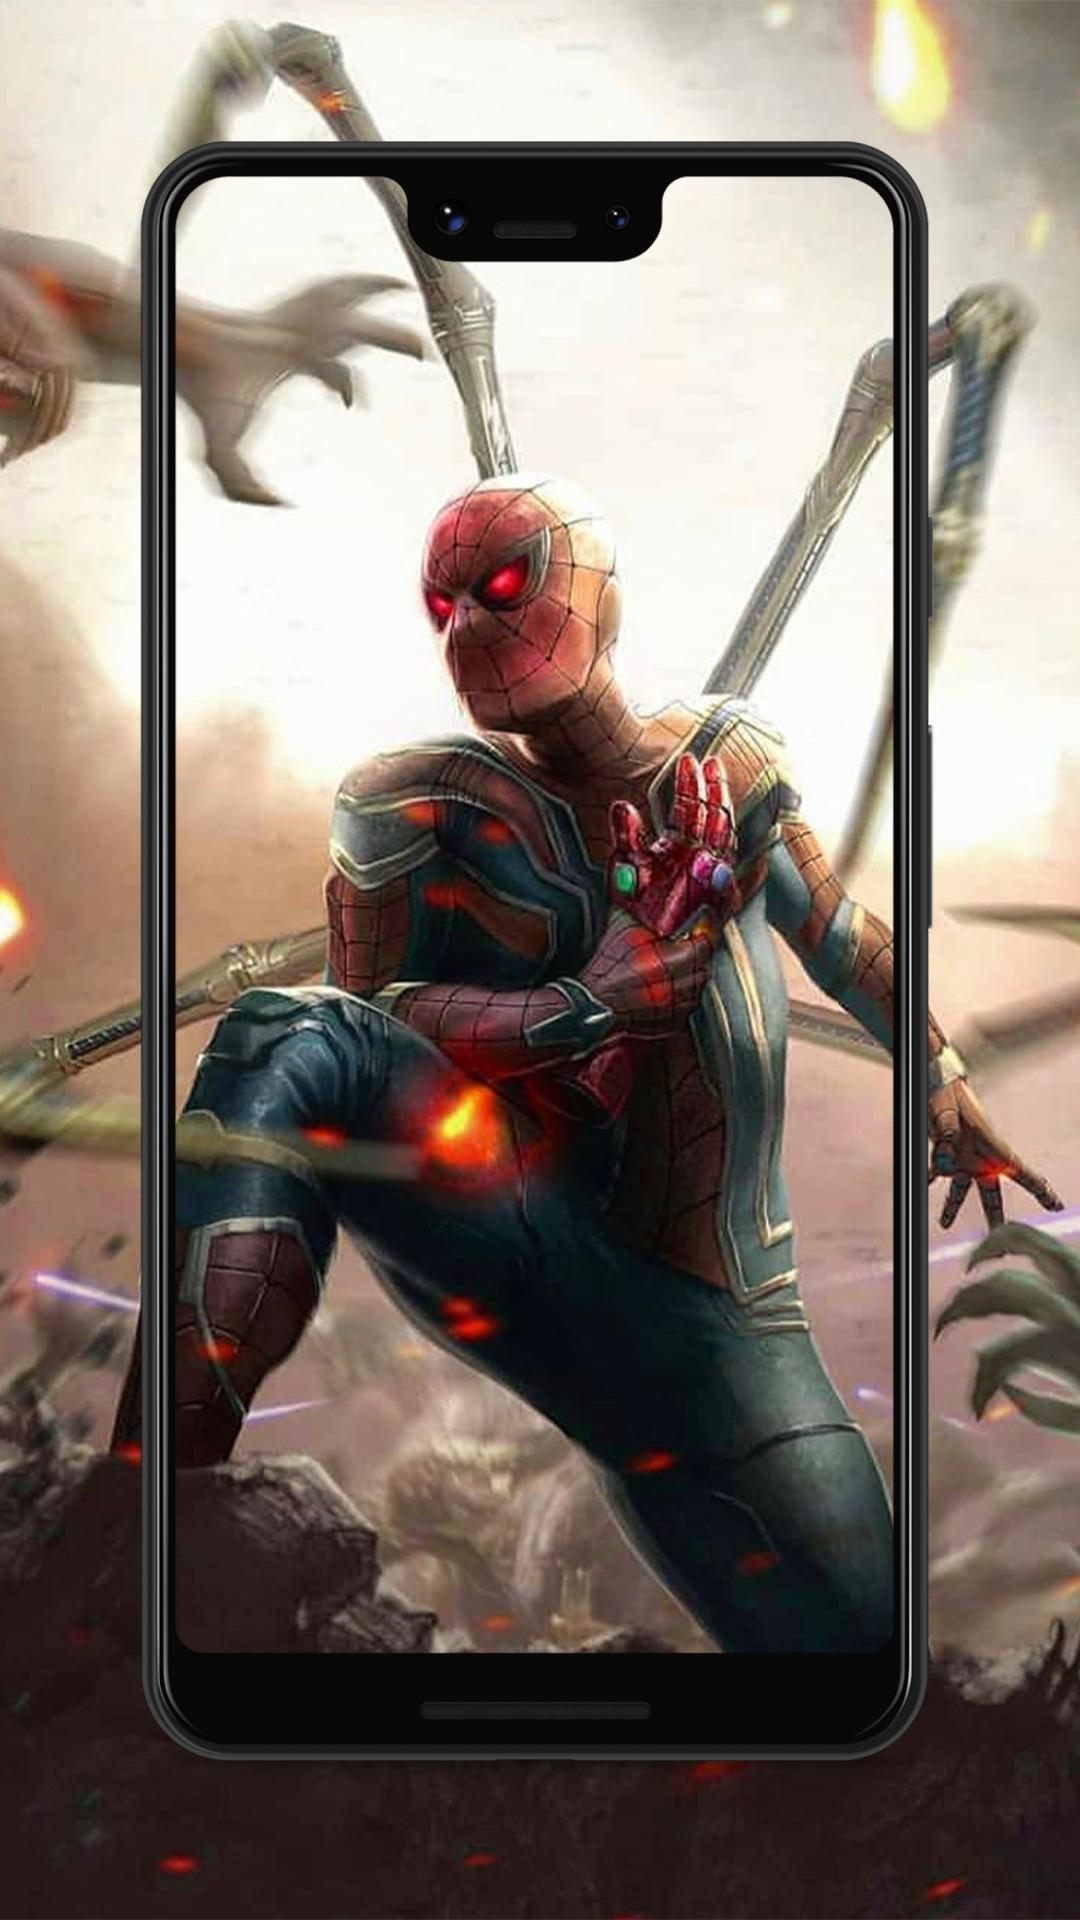 The Spectacular Spider Man Wallpaper 2019 For Android Apk